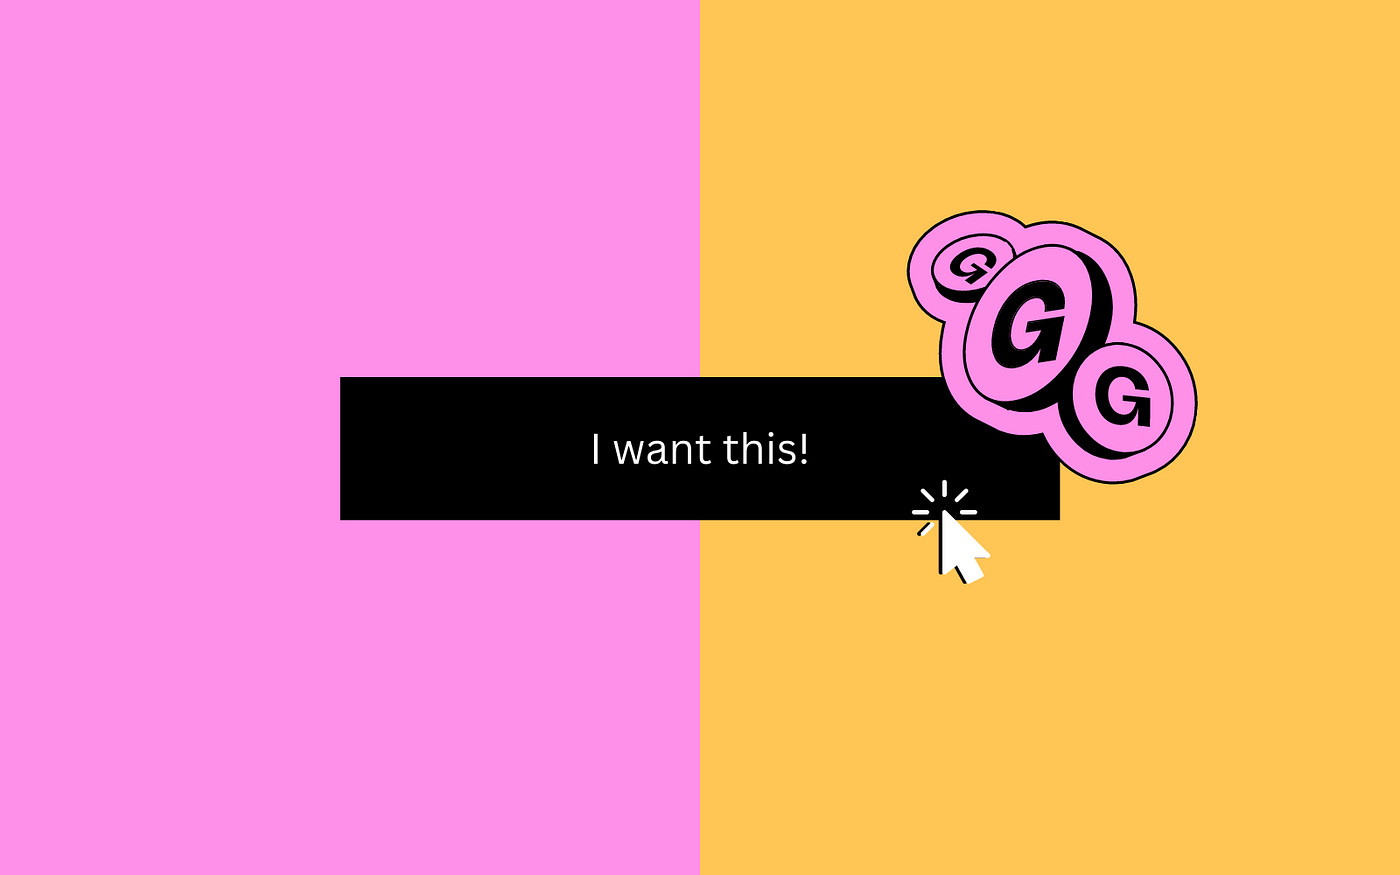 Image by the author using Canva Pro — image displays a button with I want this! label.